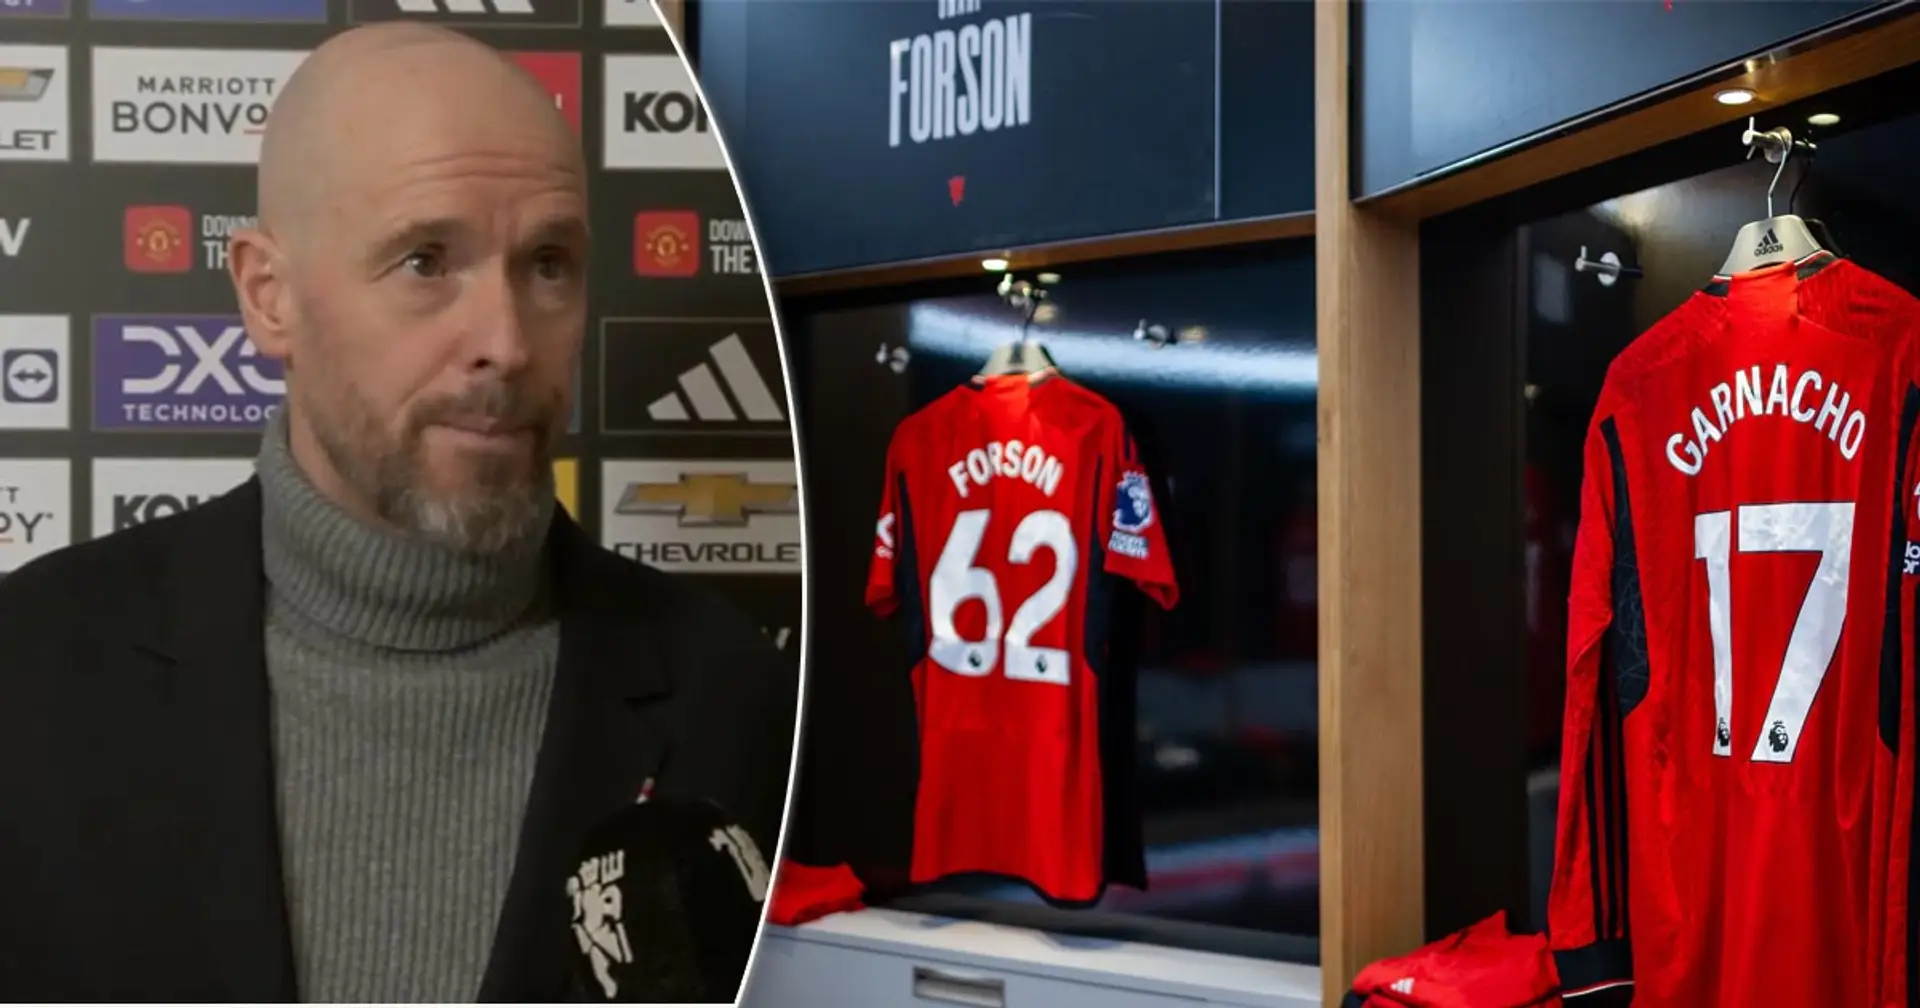 Erik ten Hag reveals reason for starting Forson vs Fulham, names what he wants to see from Man United attack